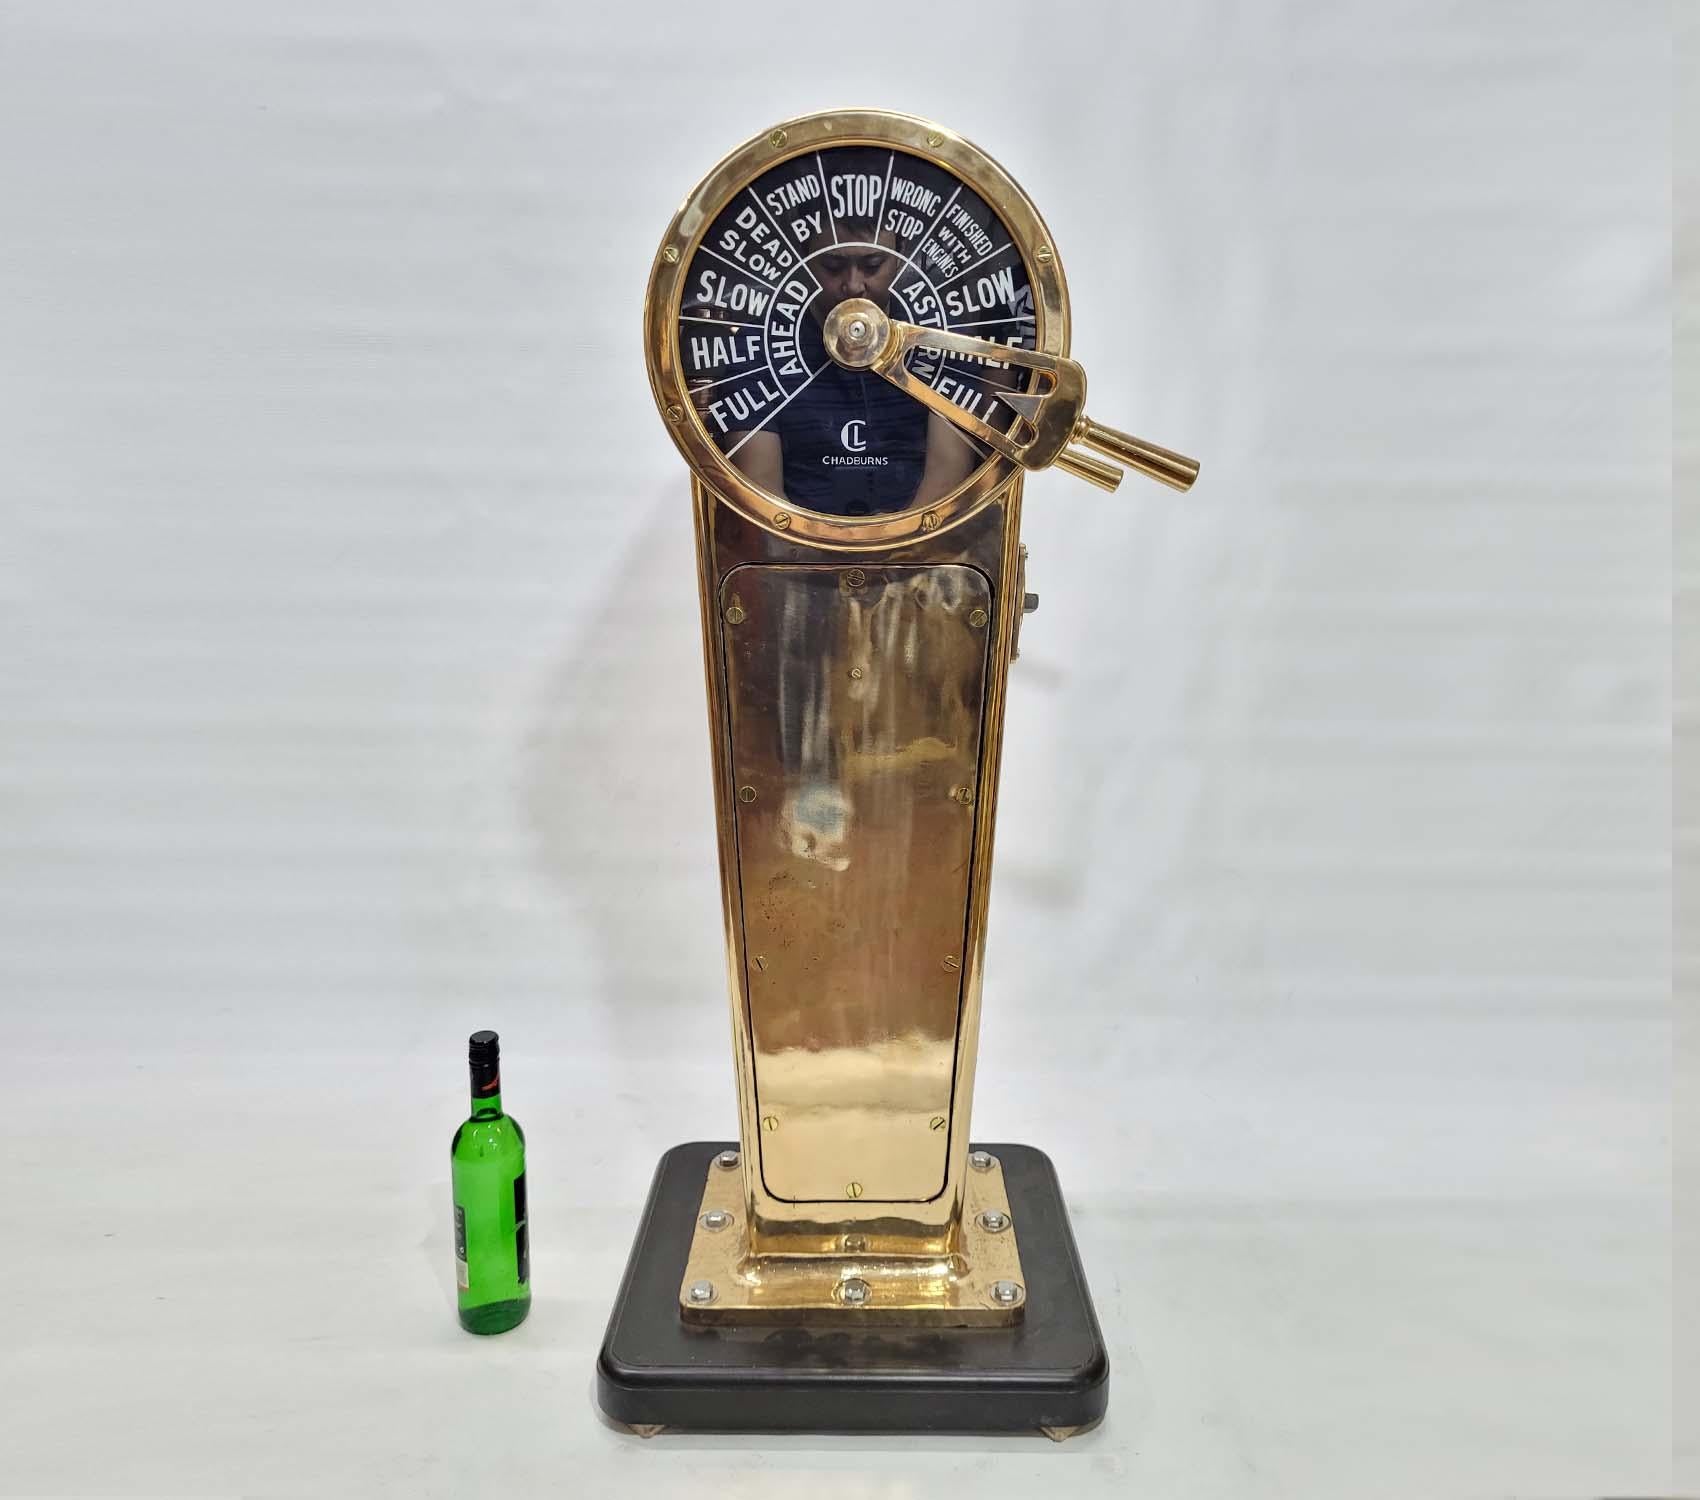 Solid brass ships bridge telegraph by the venerable English maker Chadburns of Liverpool England. Twin faceplate design with ahead and astern commands. Meticulously polished and lacquered. Mounted to a thick wood base. Art deco style with a tapered